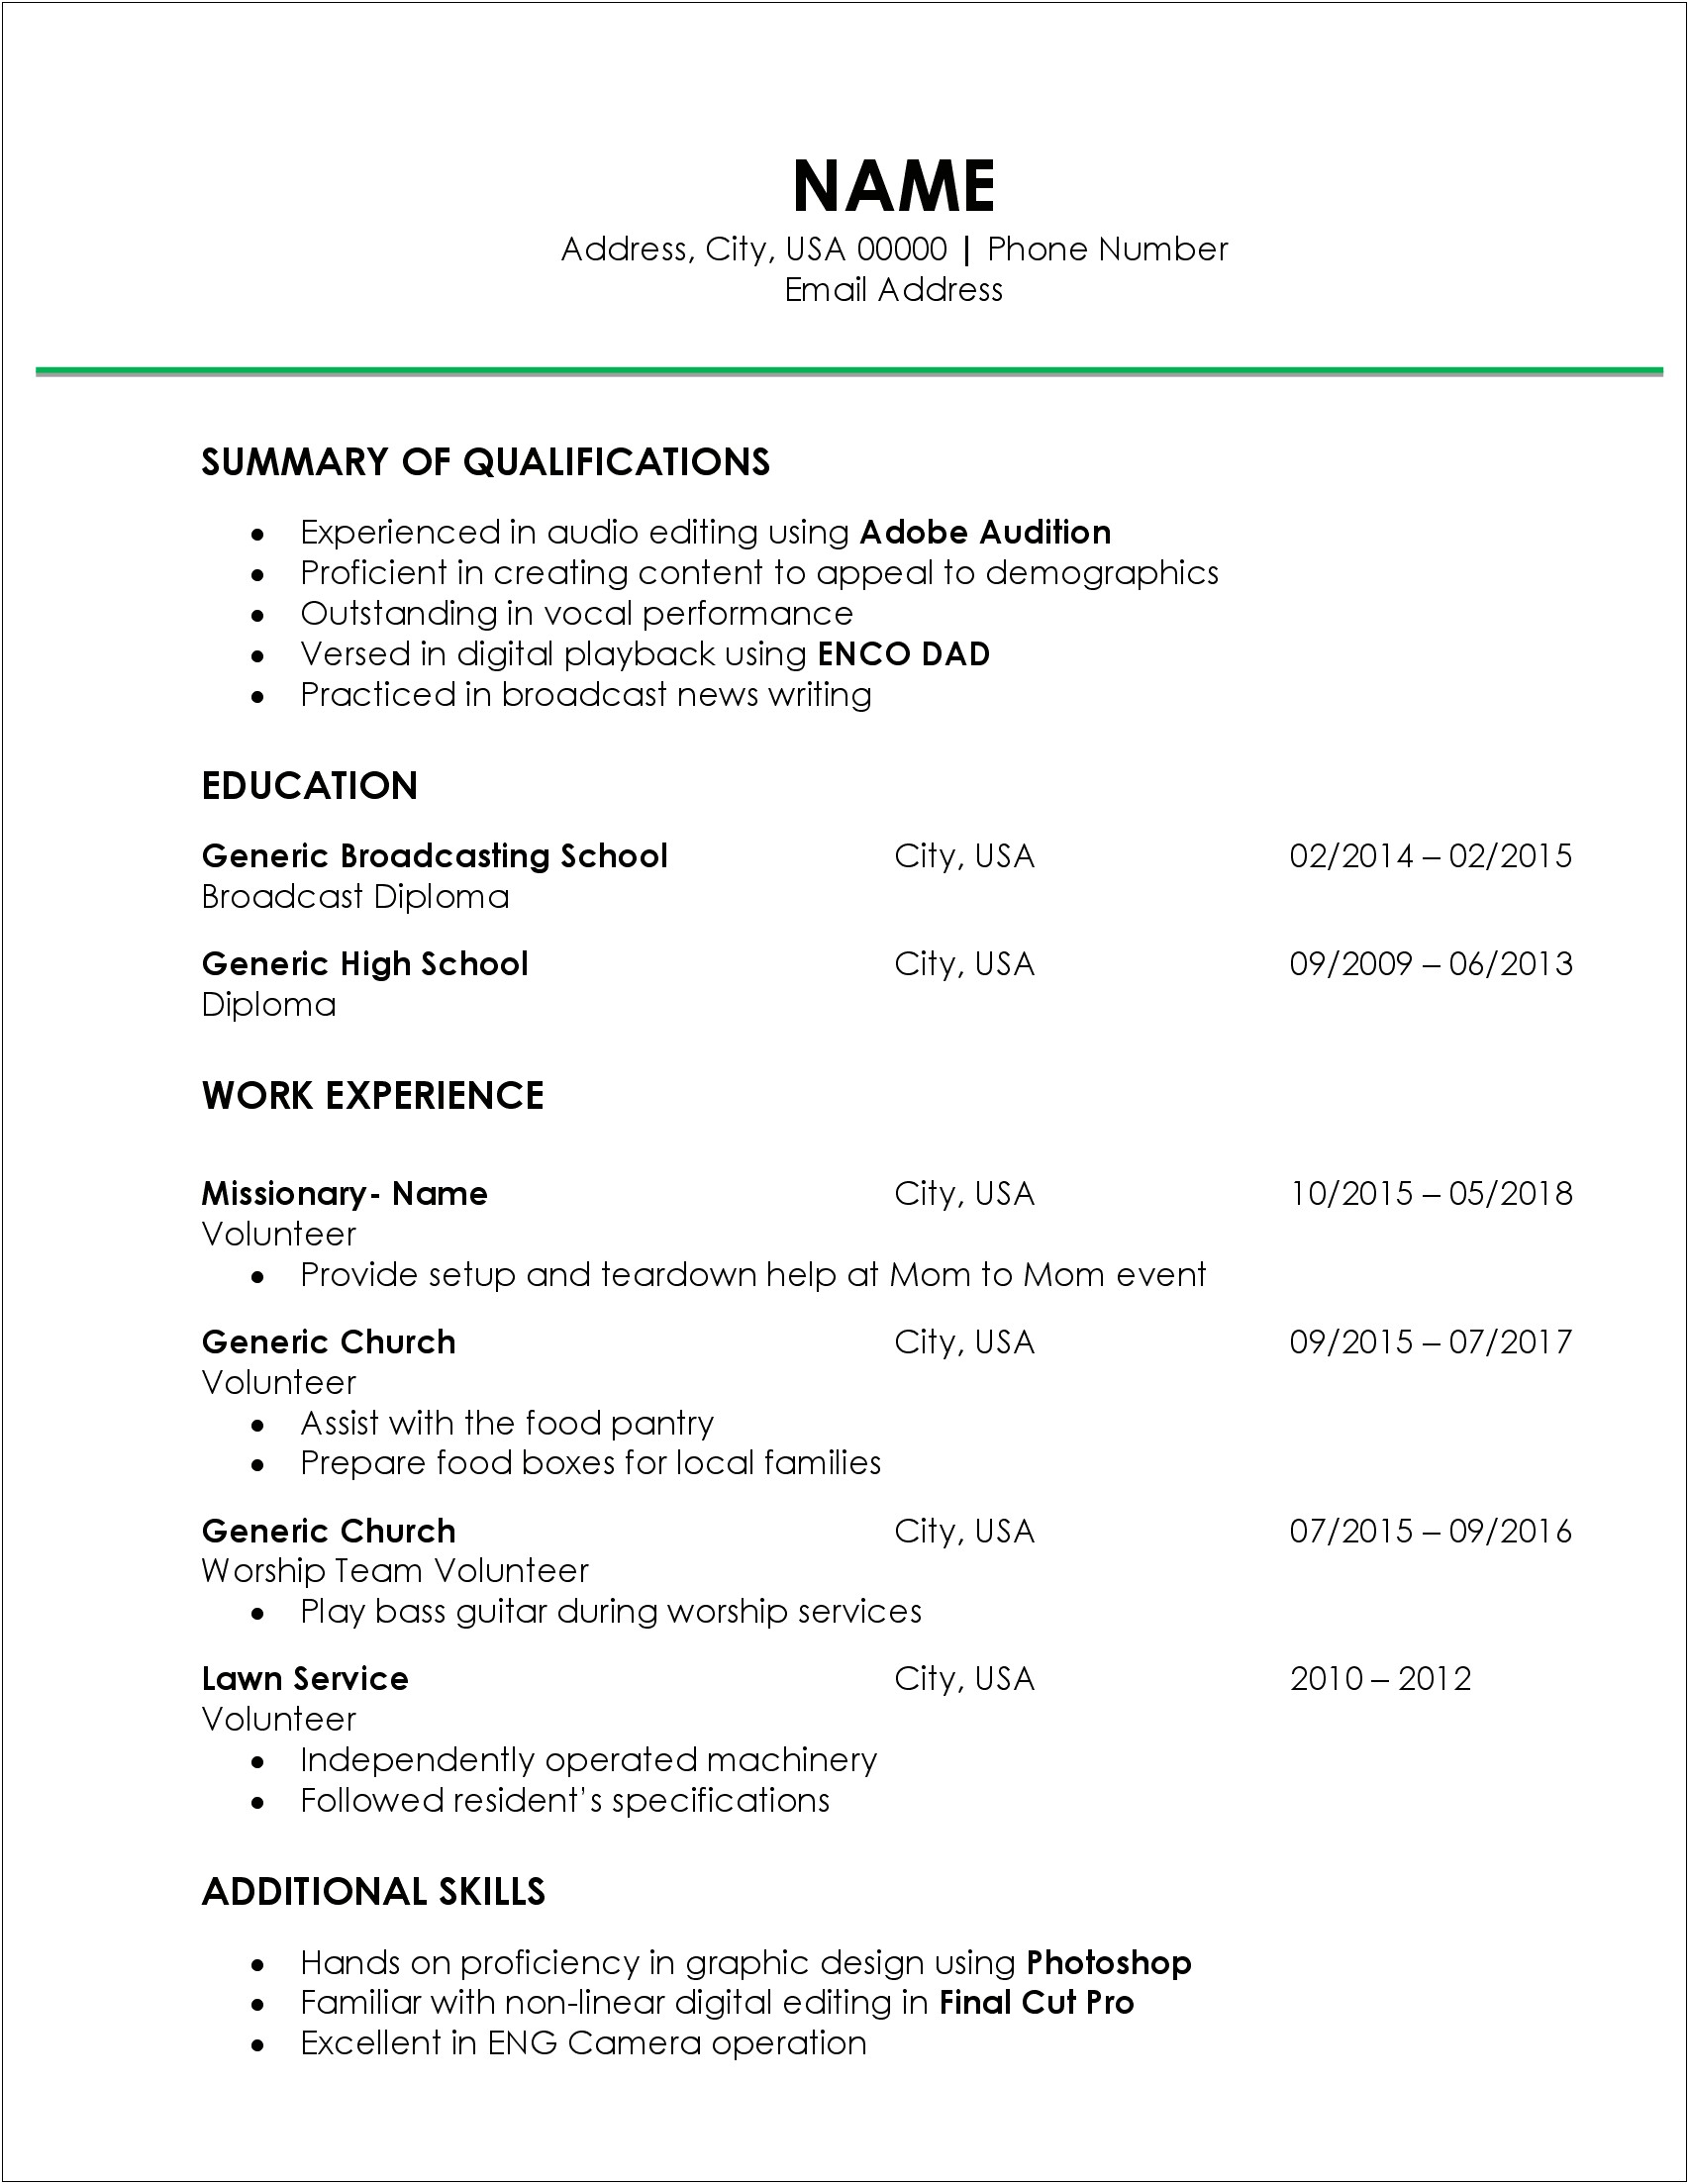 Resume With No Work Experience Nor Education